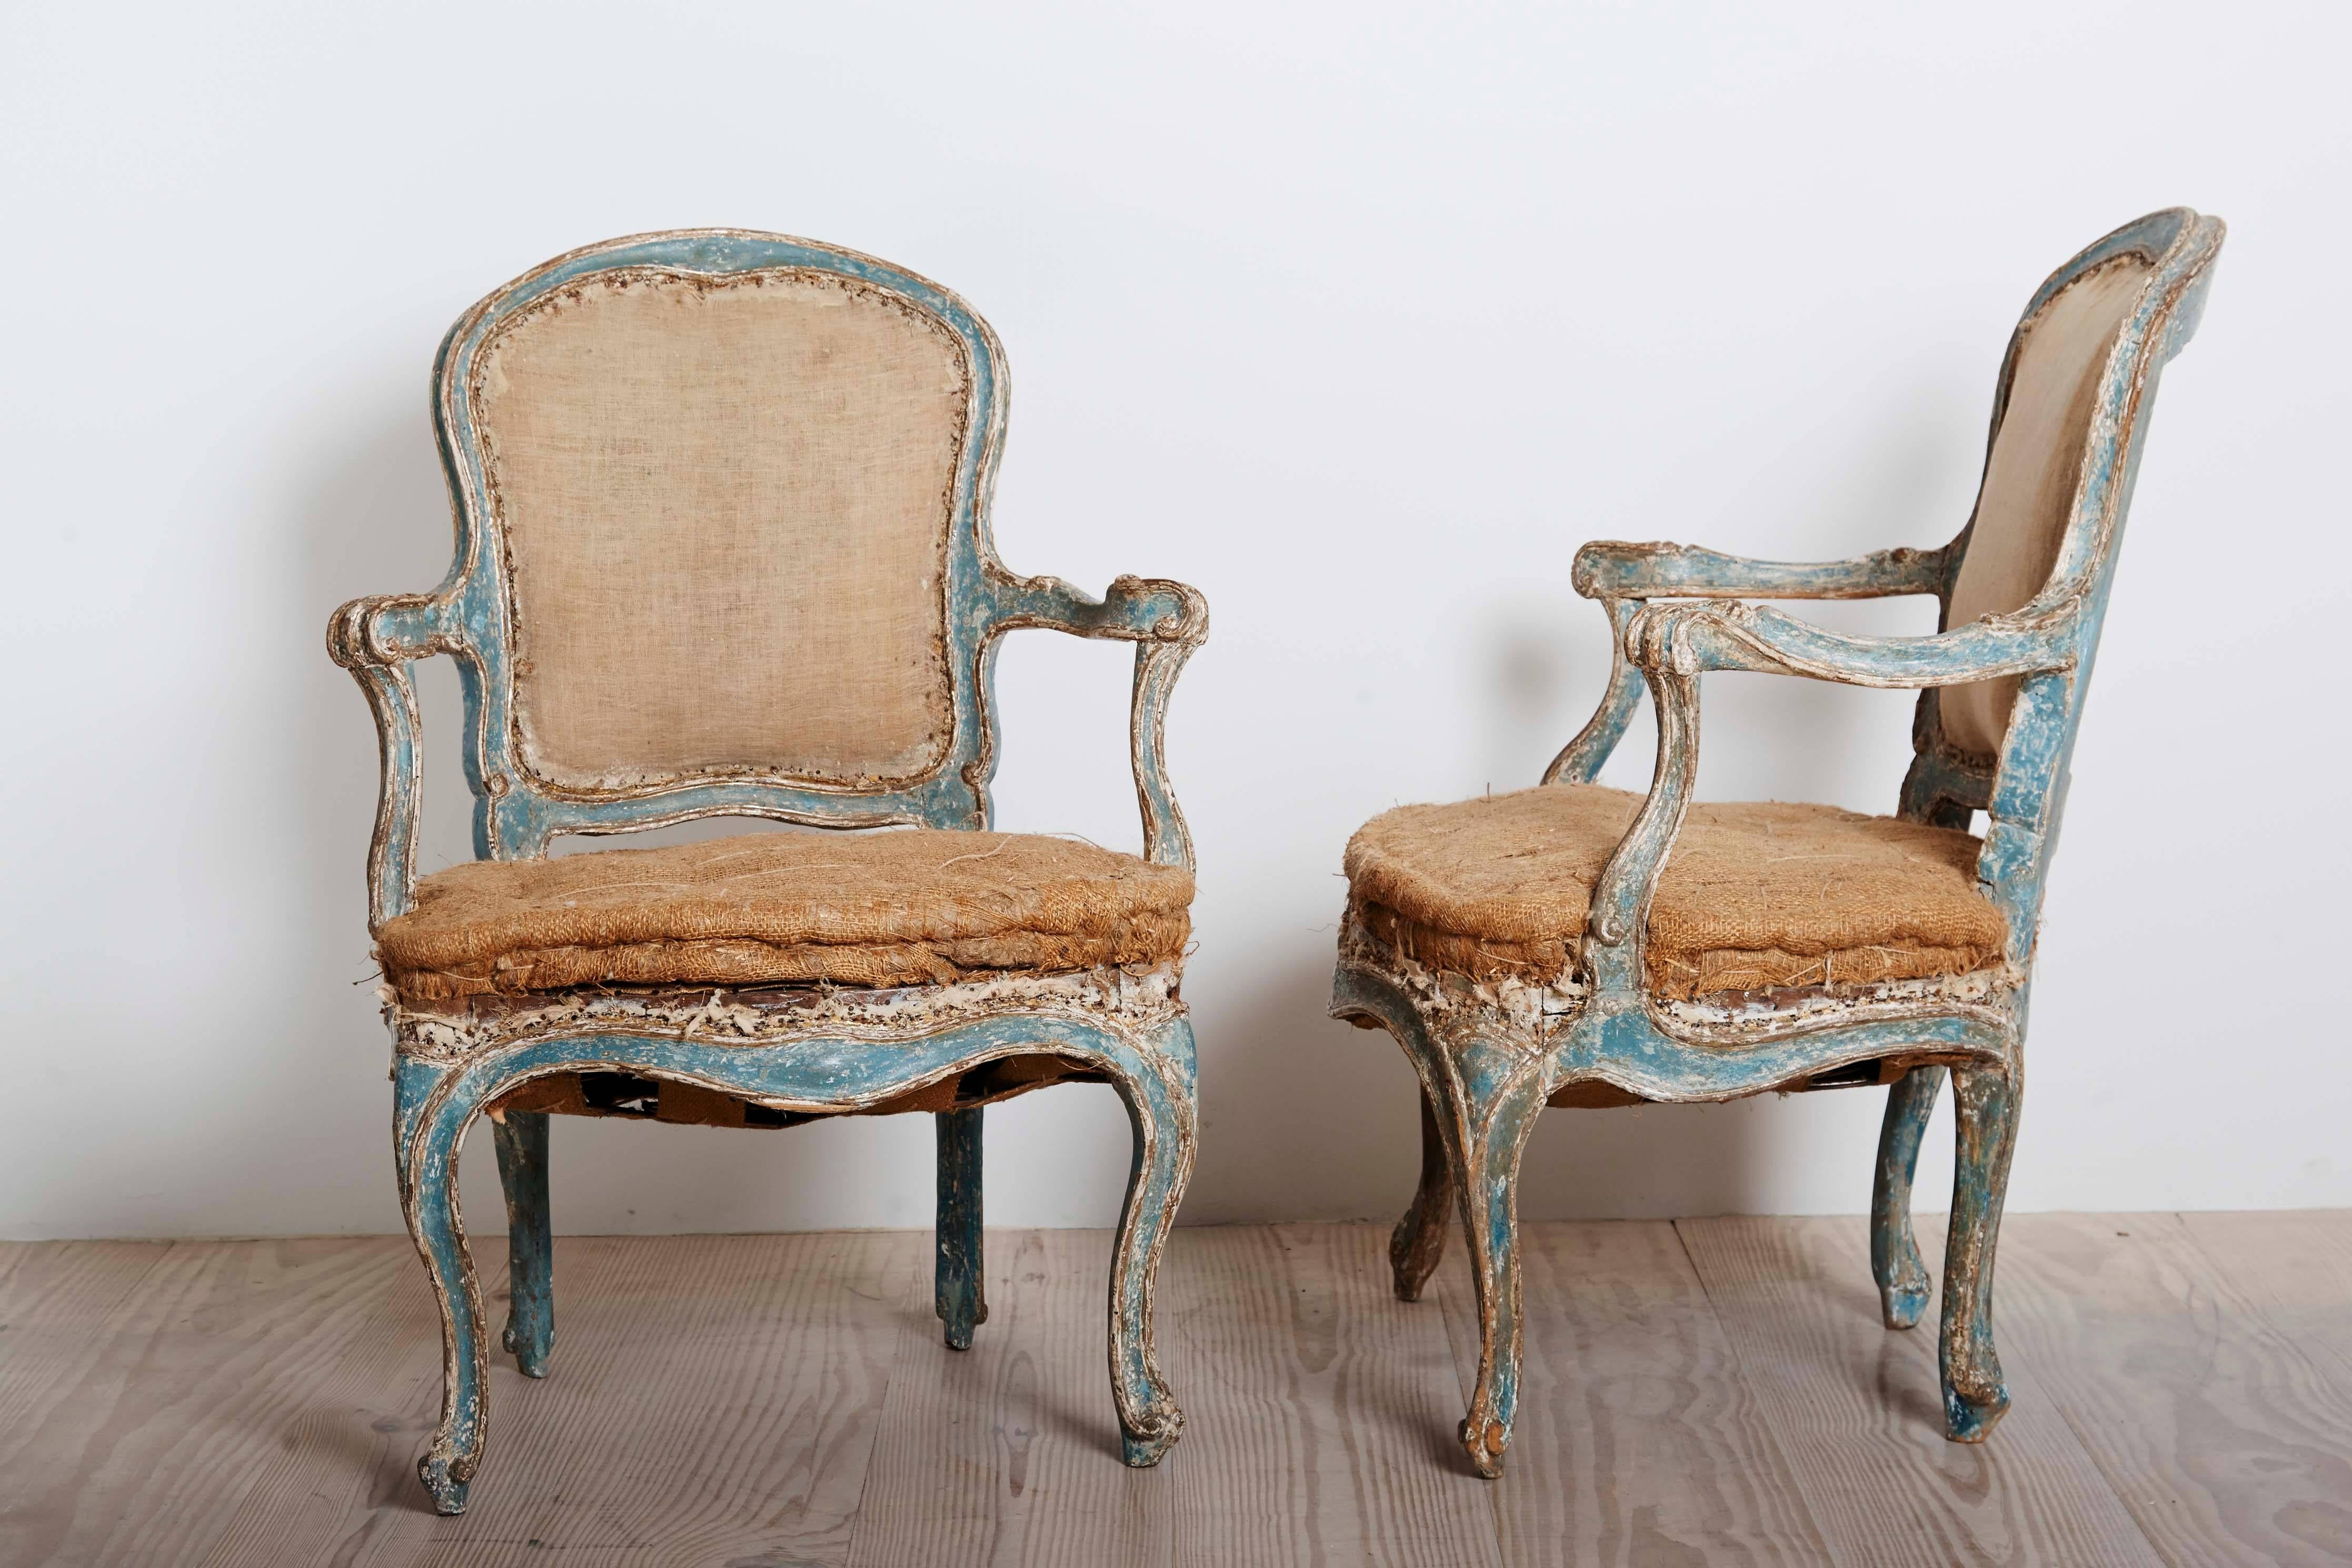 Hand-Painted Exceptional 18th Century Rococo Armchairs, pair, circa 1760